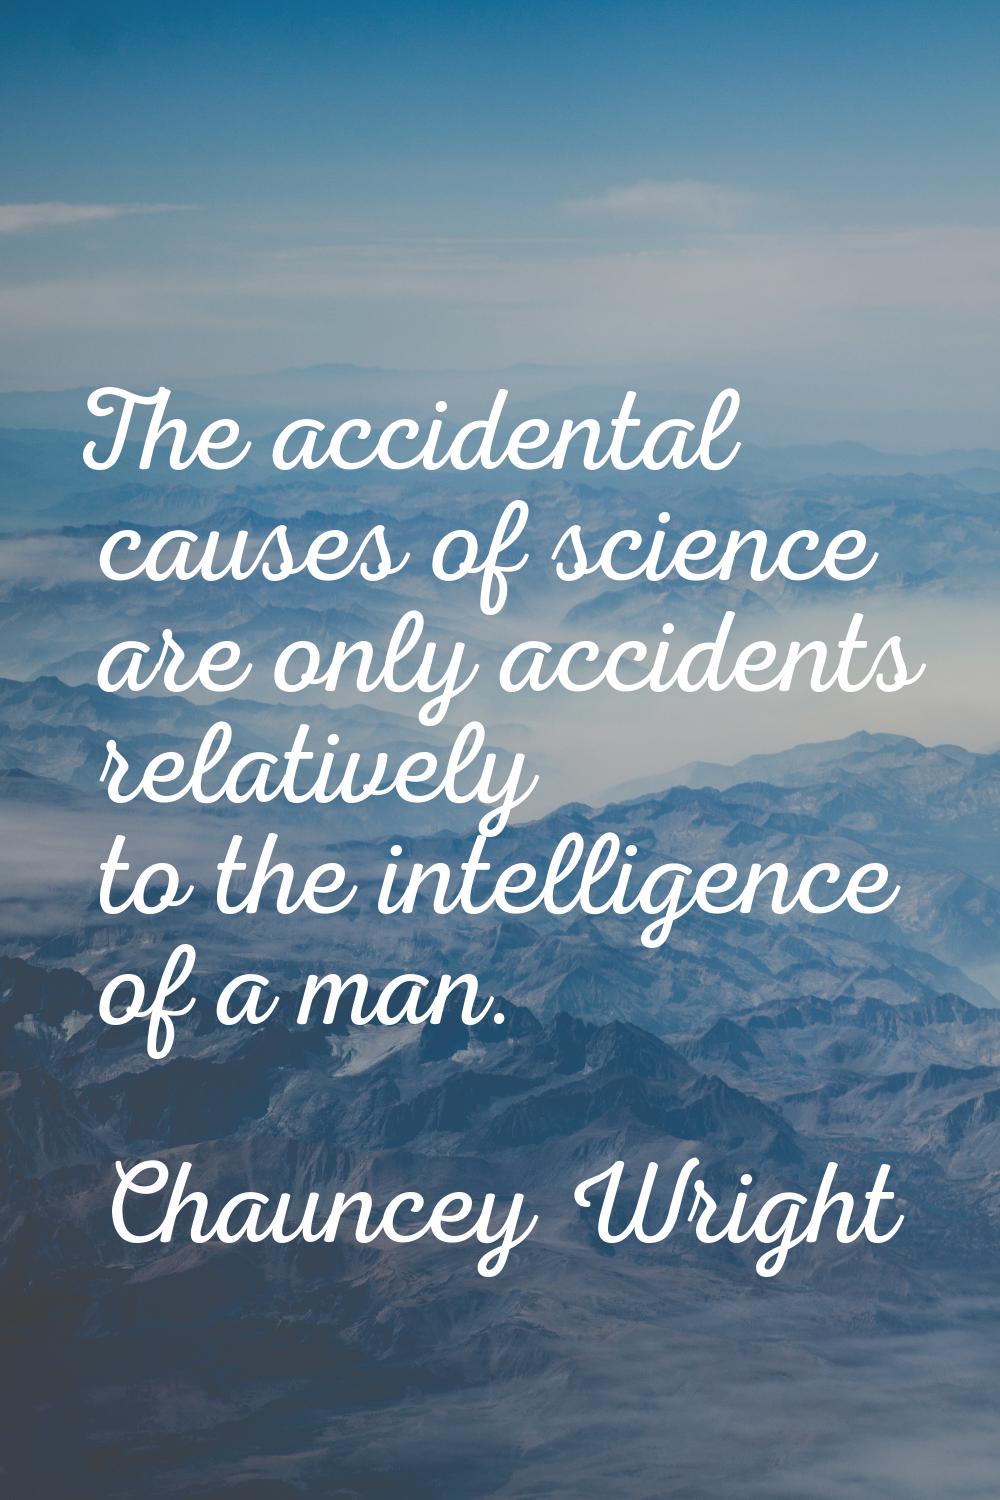 The accidental causes of science are only accidents relatively to the intelligence of a man.